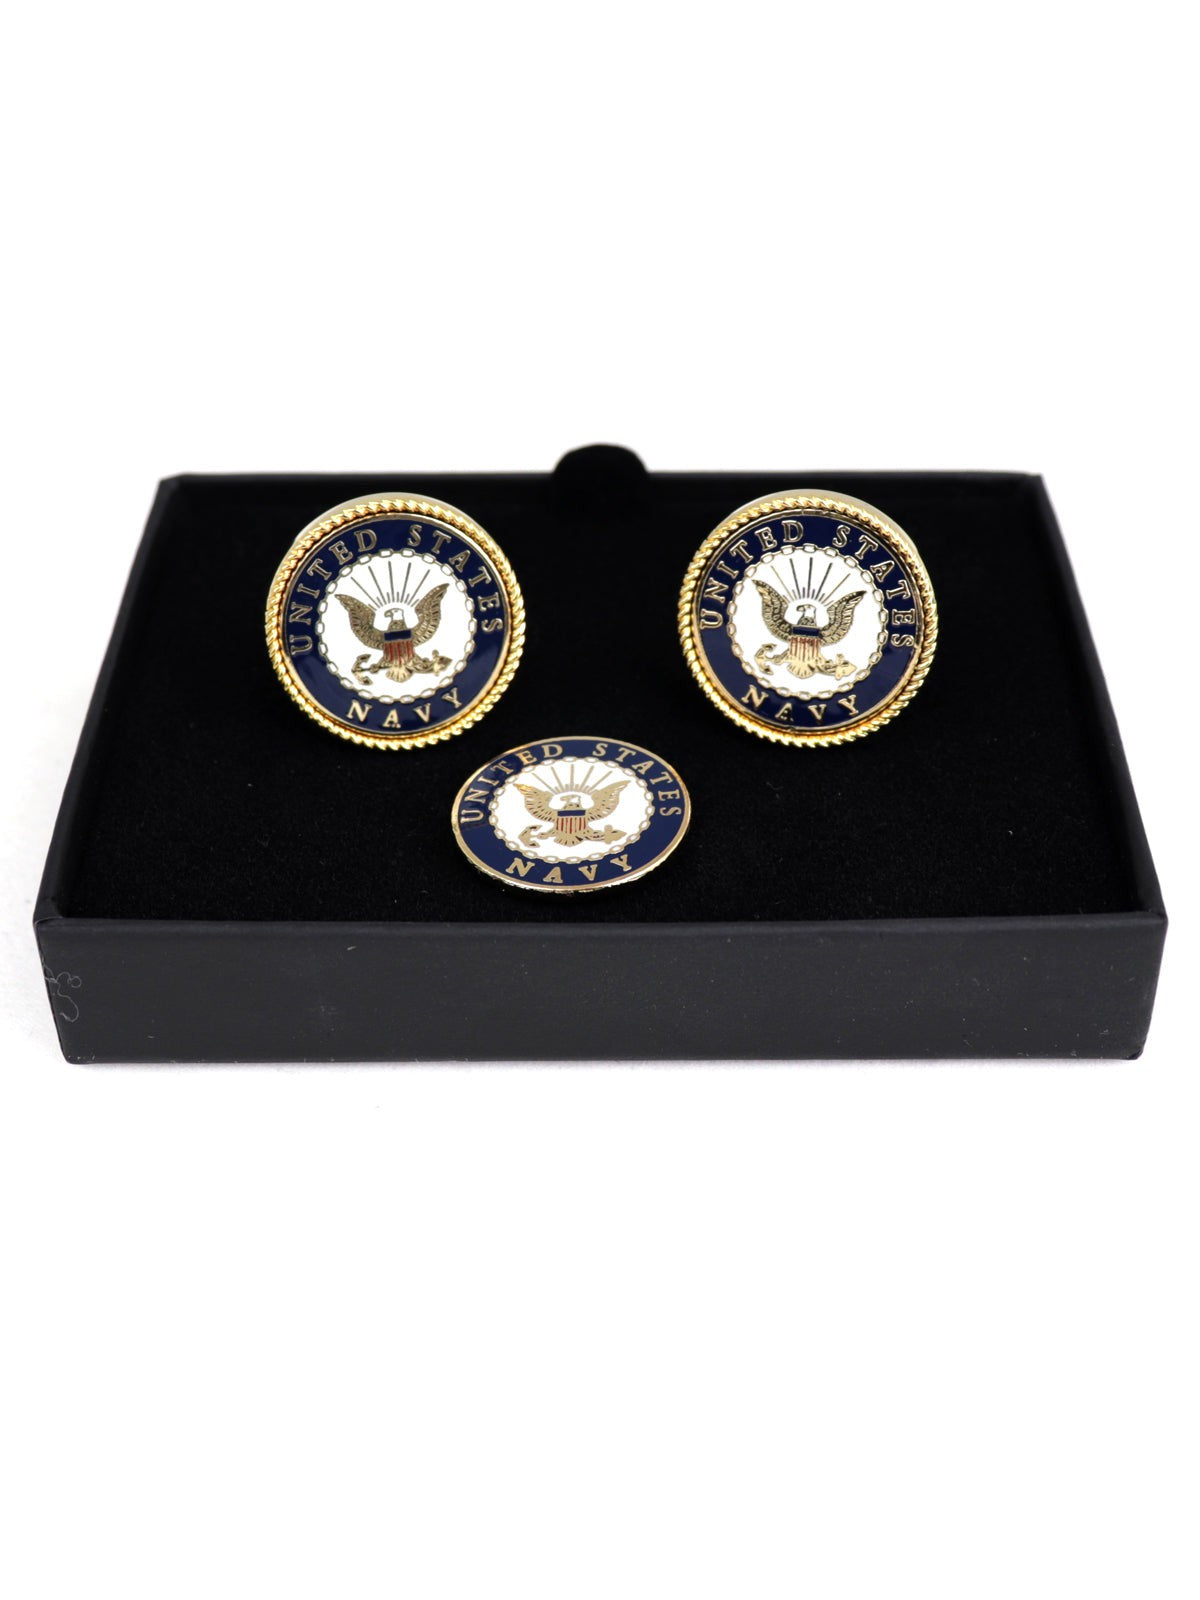 US Navy Cufflinks and Lapel Pin Tie Tack